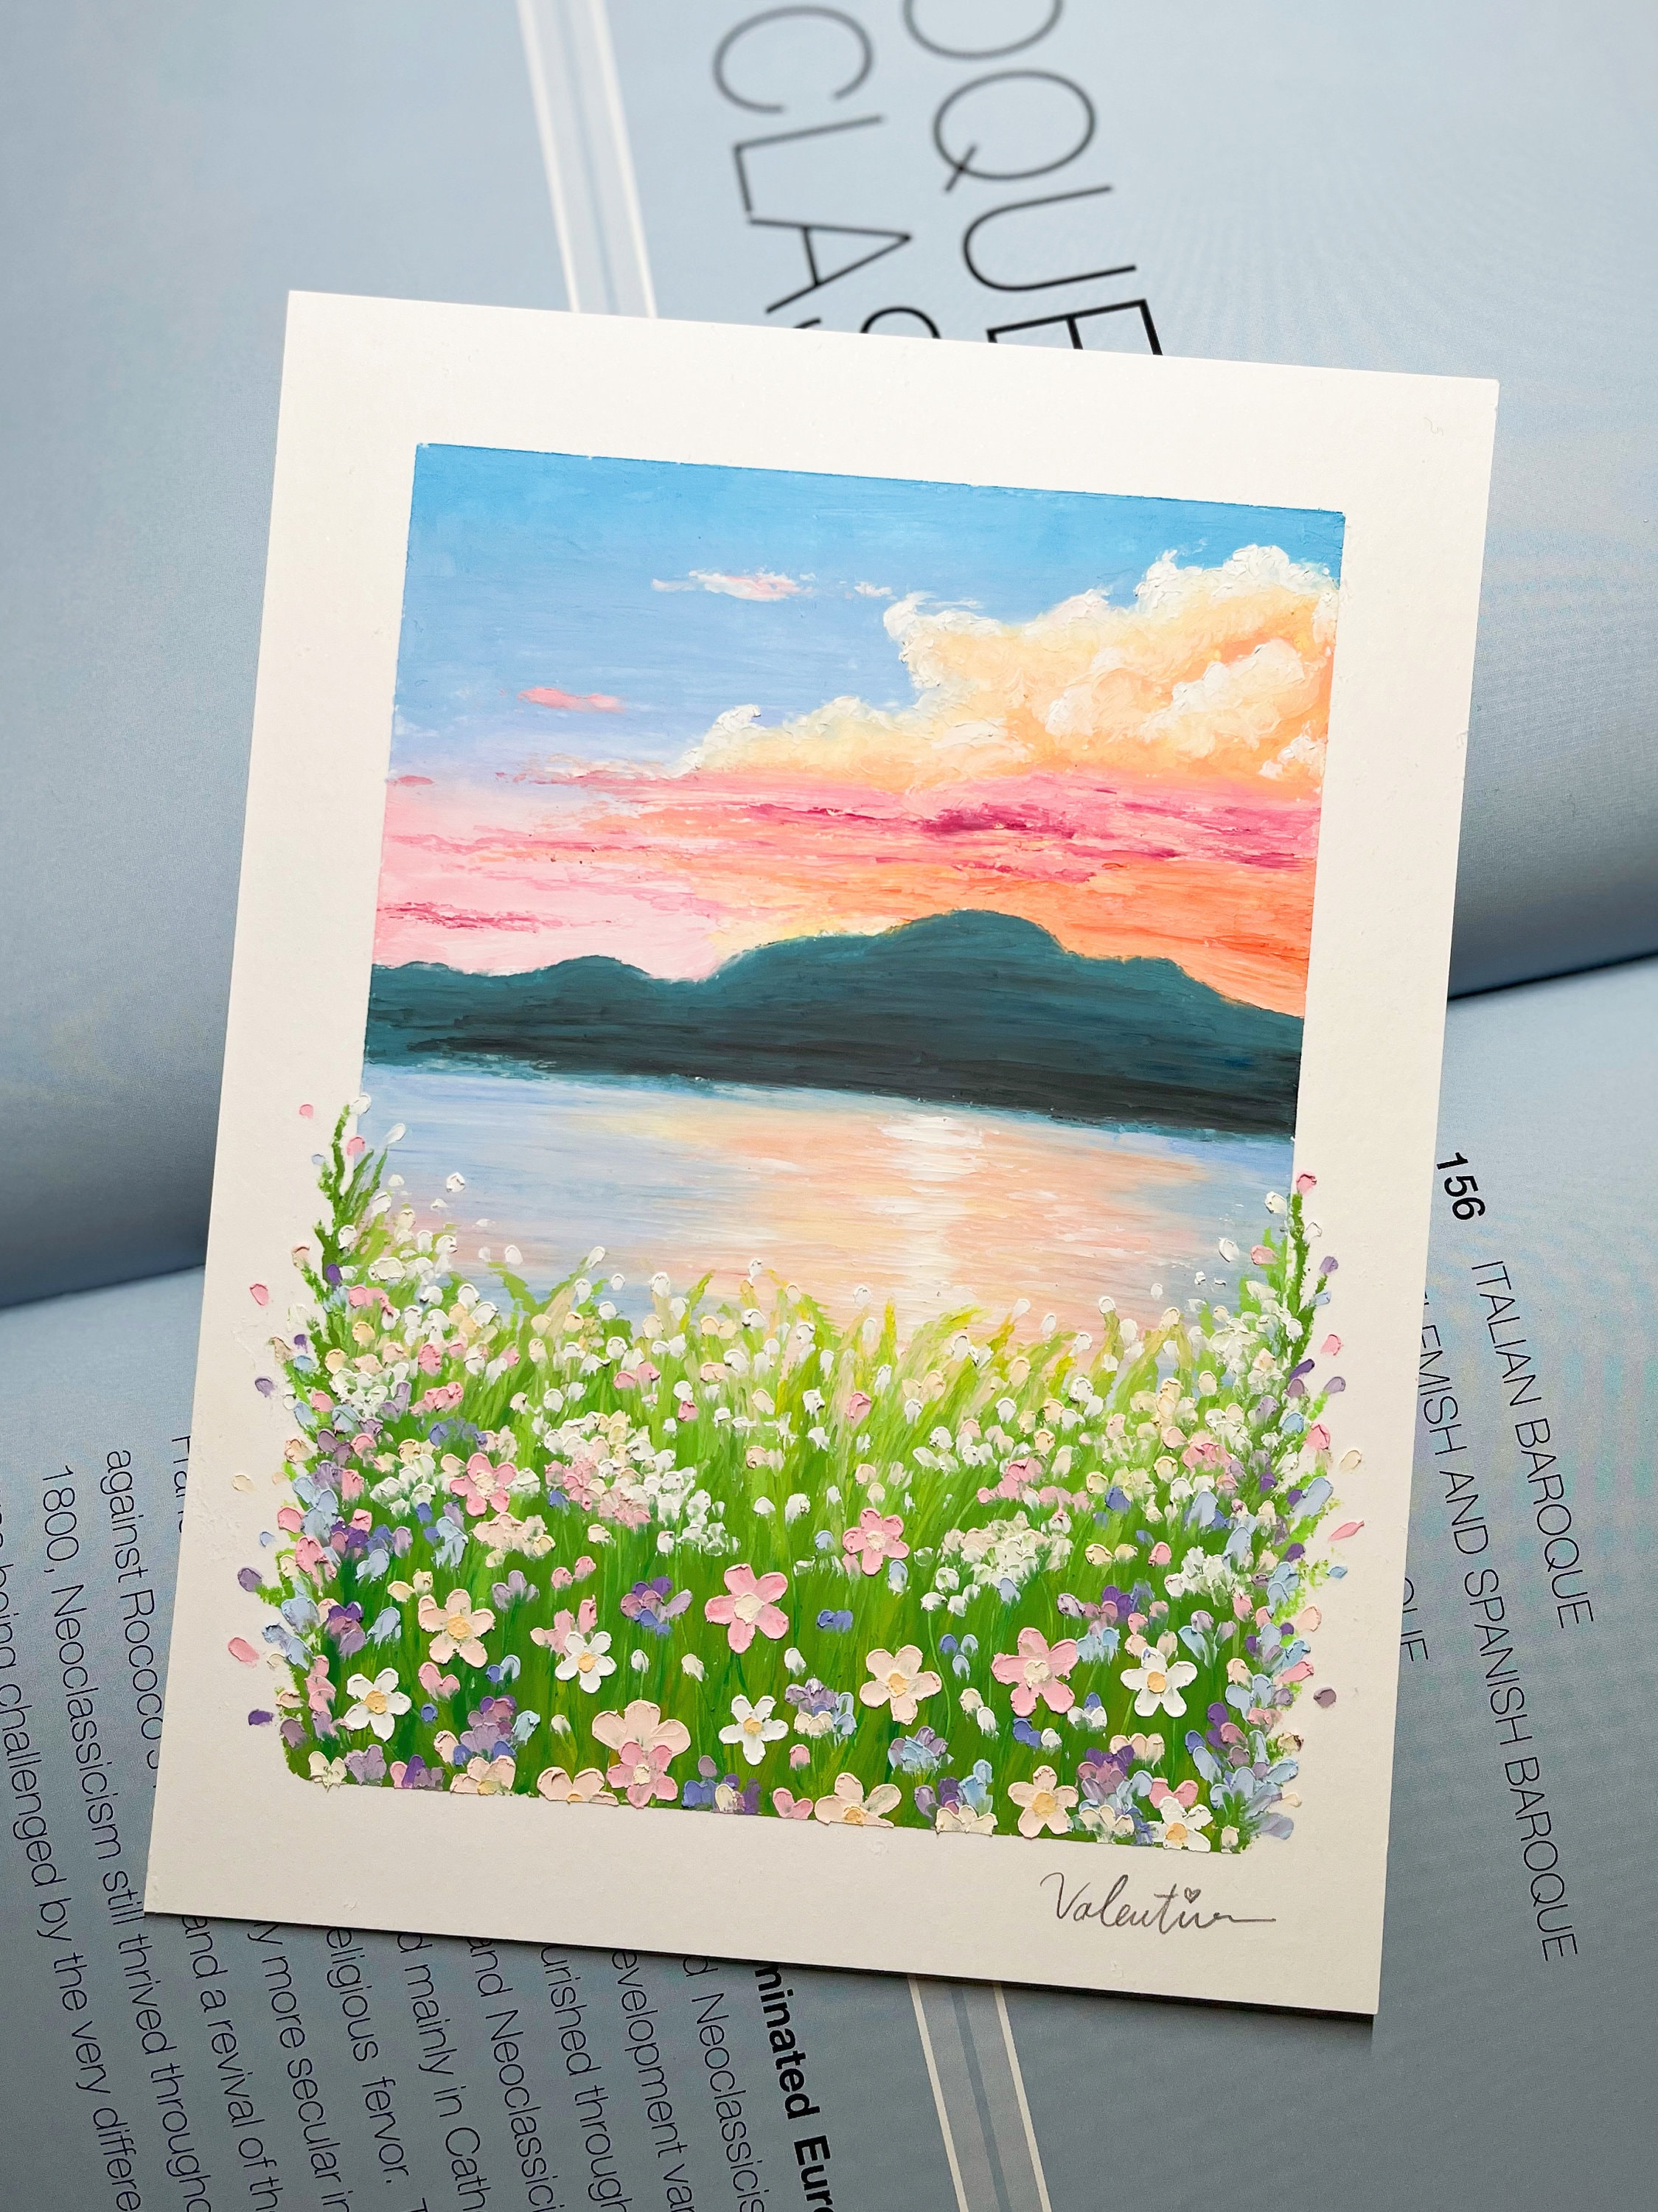 Hand Painted Oil Soft Pastel Art Painting Flowers, Clouds, Wall Art,  Decoration, Gift 6 X 8 9x12 -  Canada